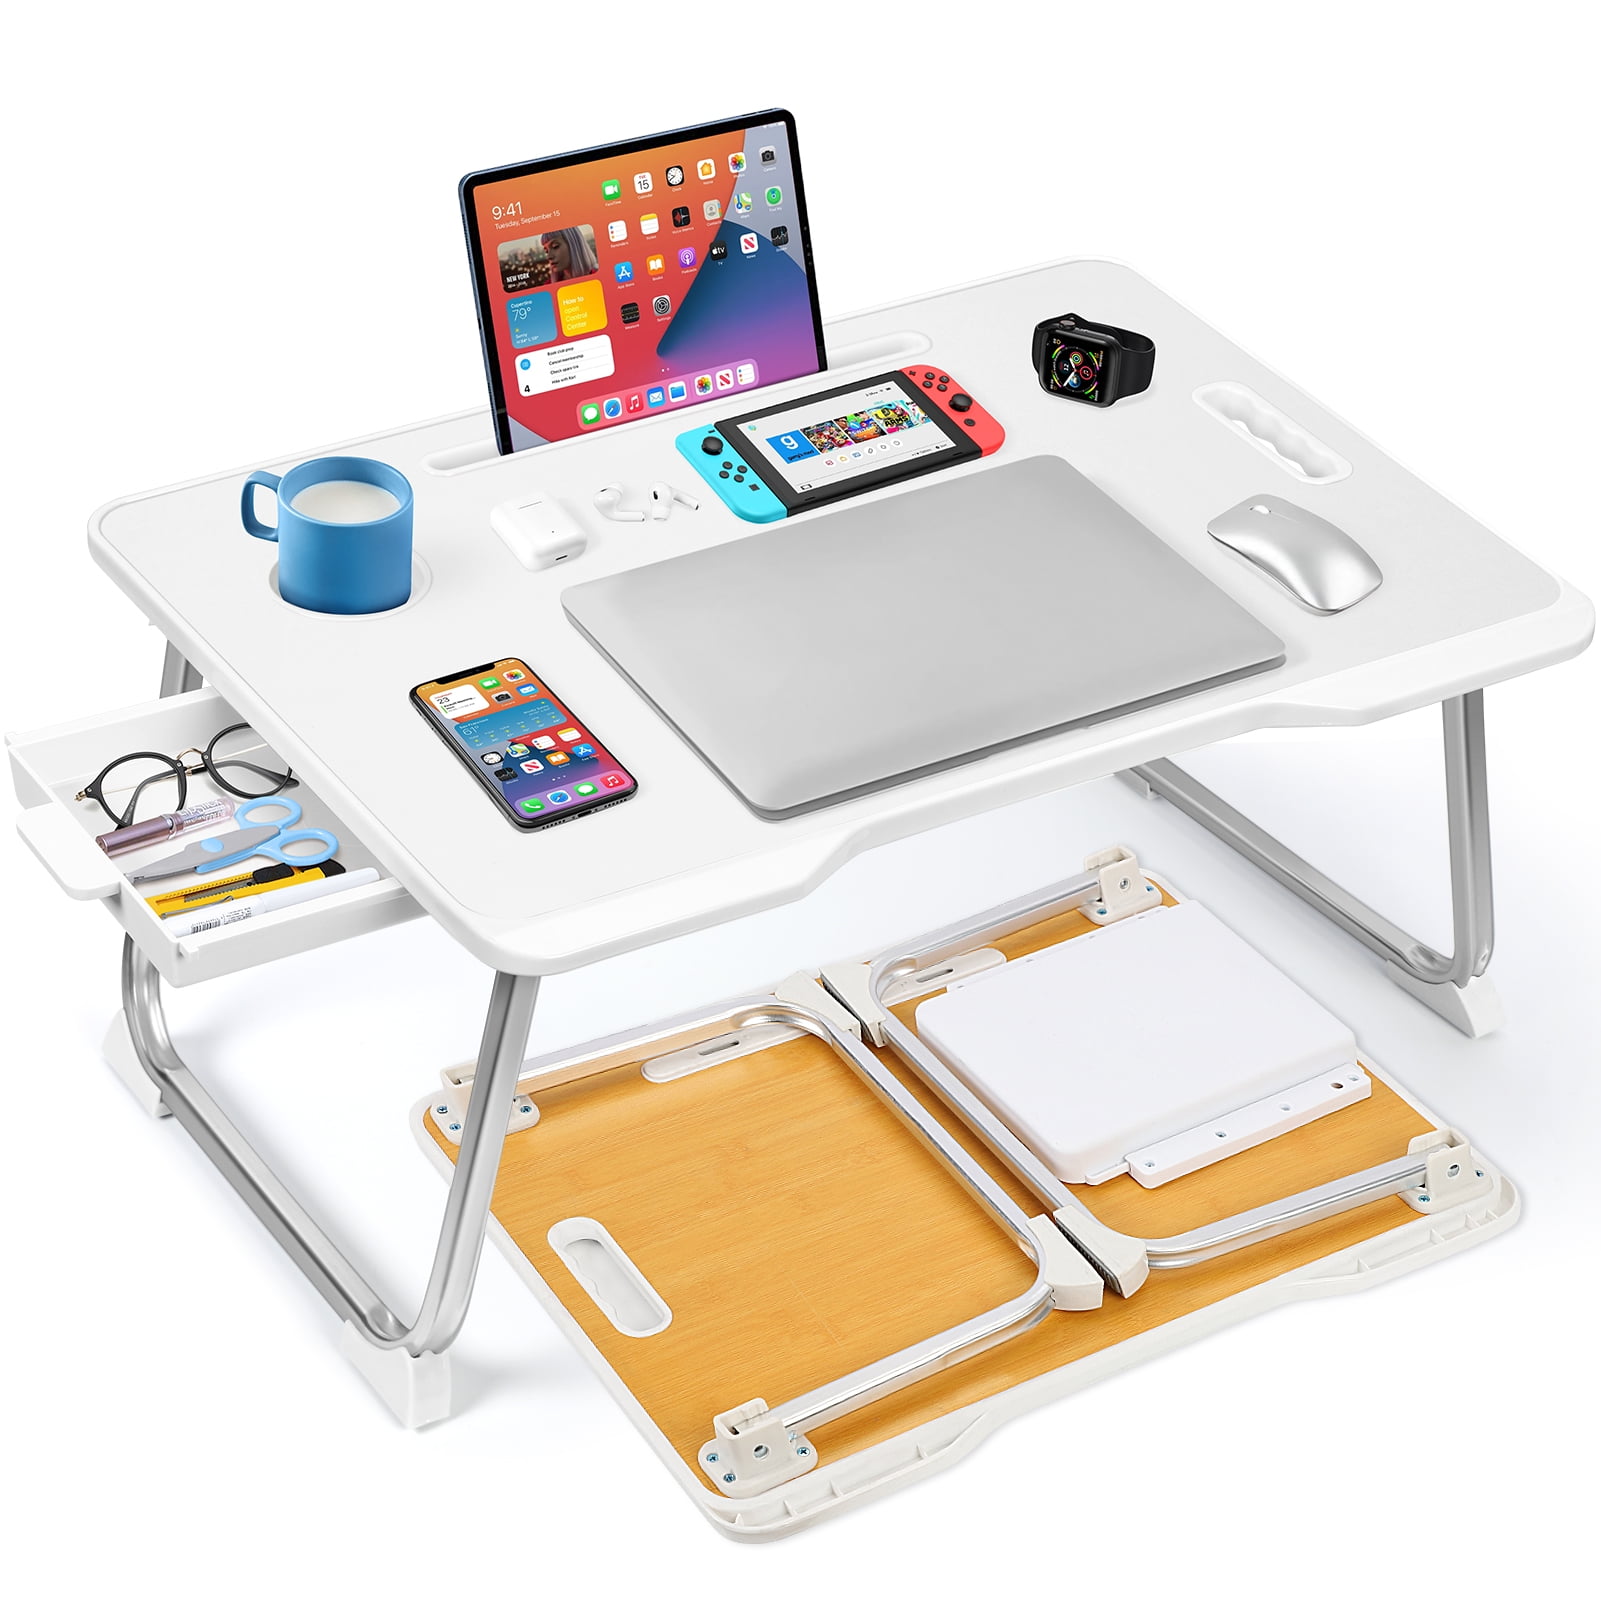 Livhil Large Lap Desk for Bed | Laptop Table, Portable Desk, Bed Laptop Desk, for Bed, Desk, Laptop, Writing, Computer Bed Table for Laptop | Floor Table, Floor Desk for Adults (White)